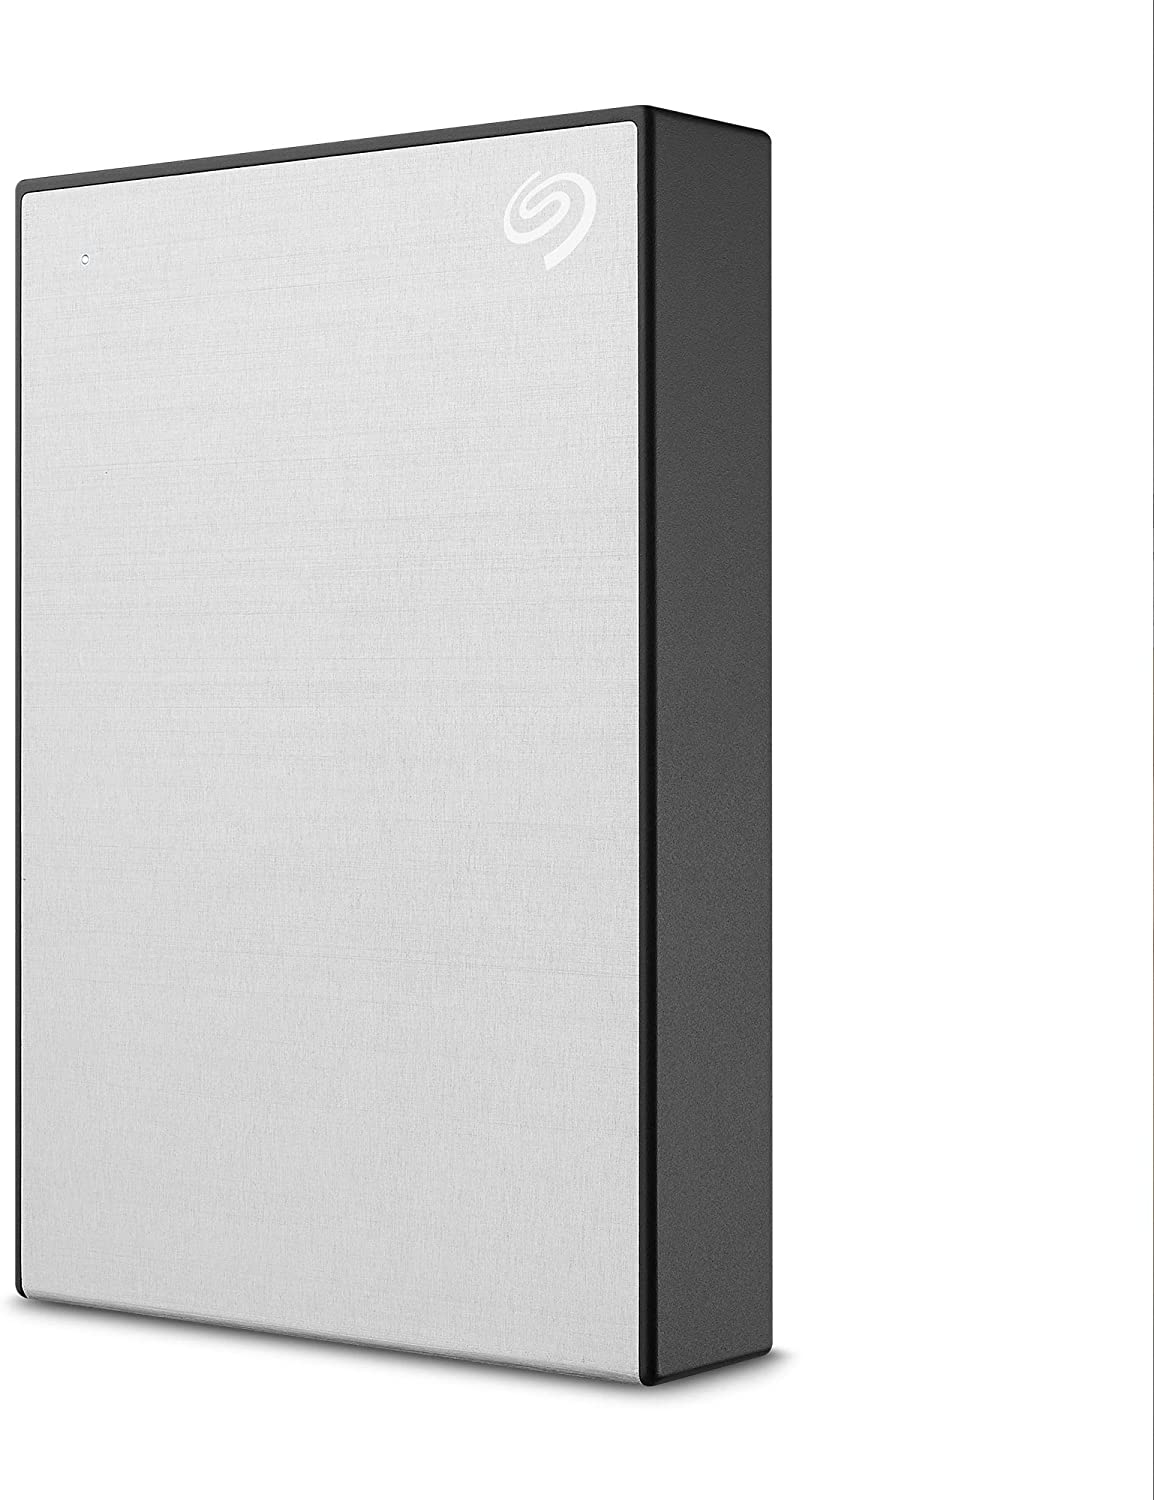 Hard disk extern seagate one touch 4tb usb 3.0 silver